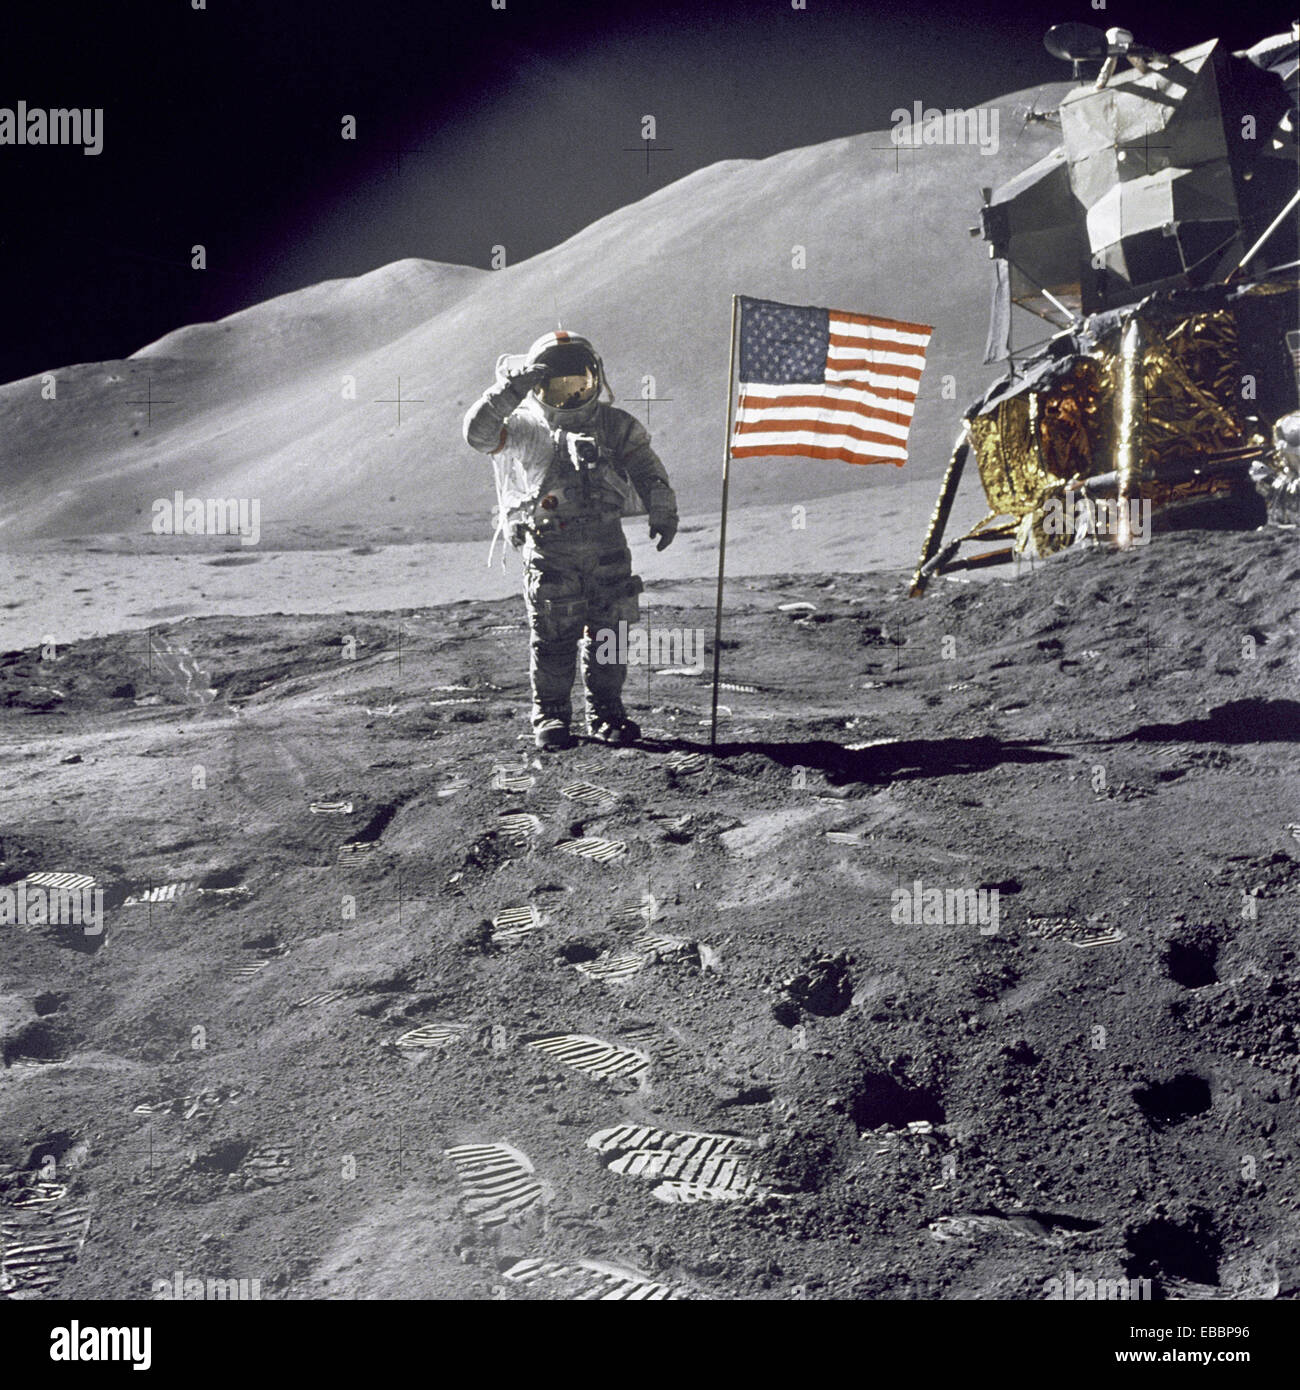 Astronaut David R. Scott, commander, gives a military salute while standing beside the deployed U.S. flag during the Apollo 15 Stock Photo